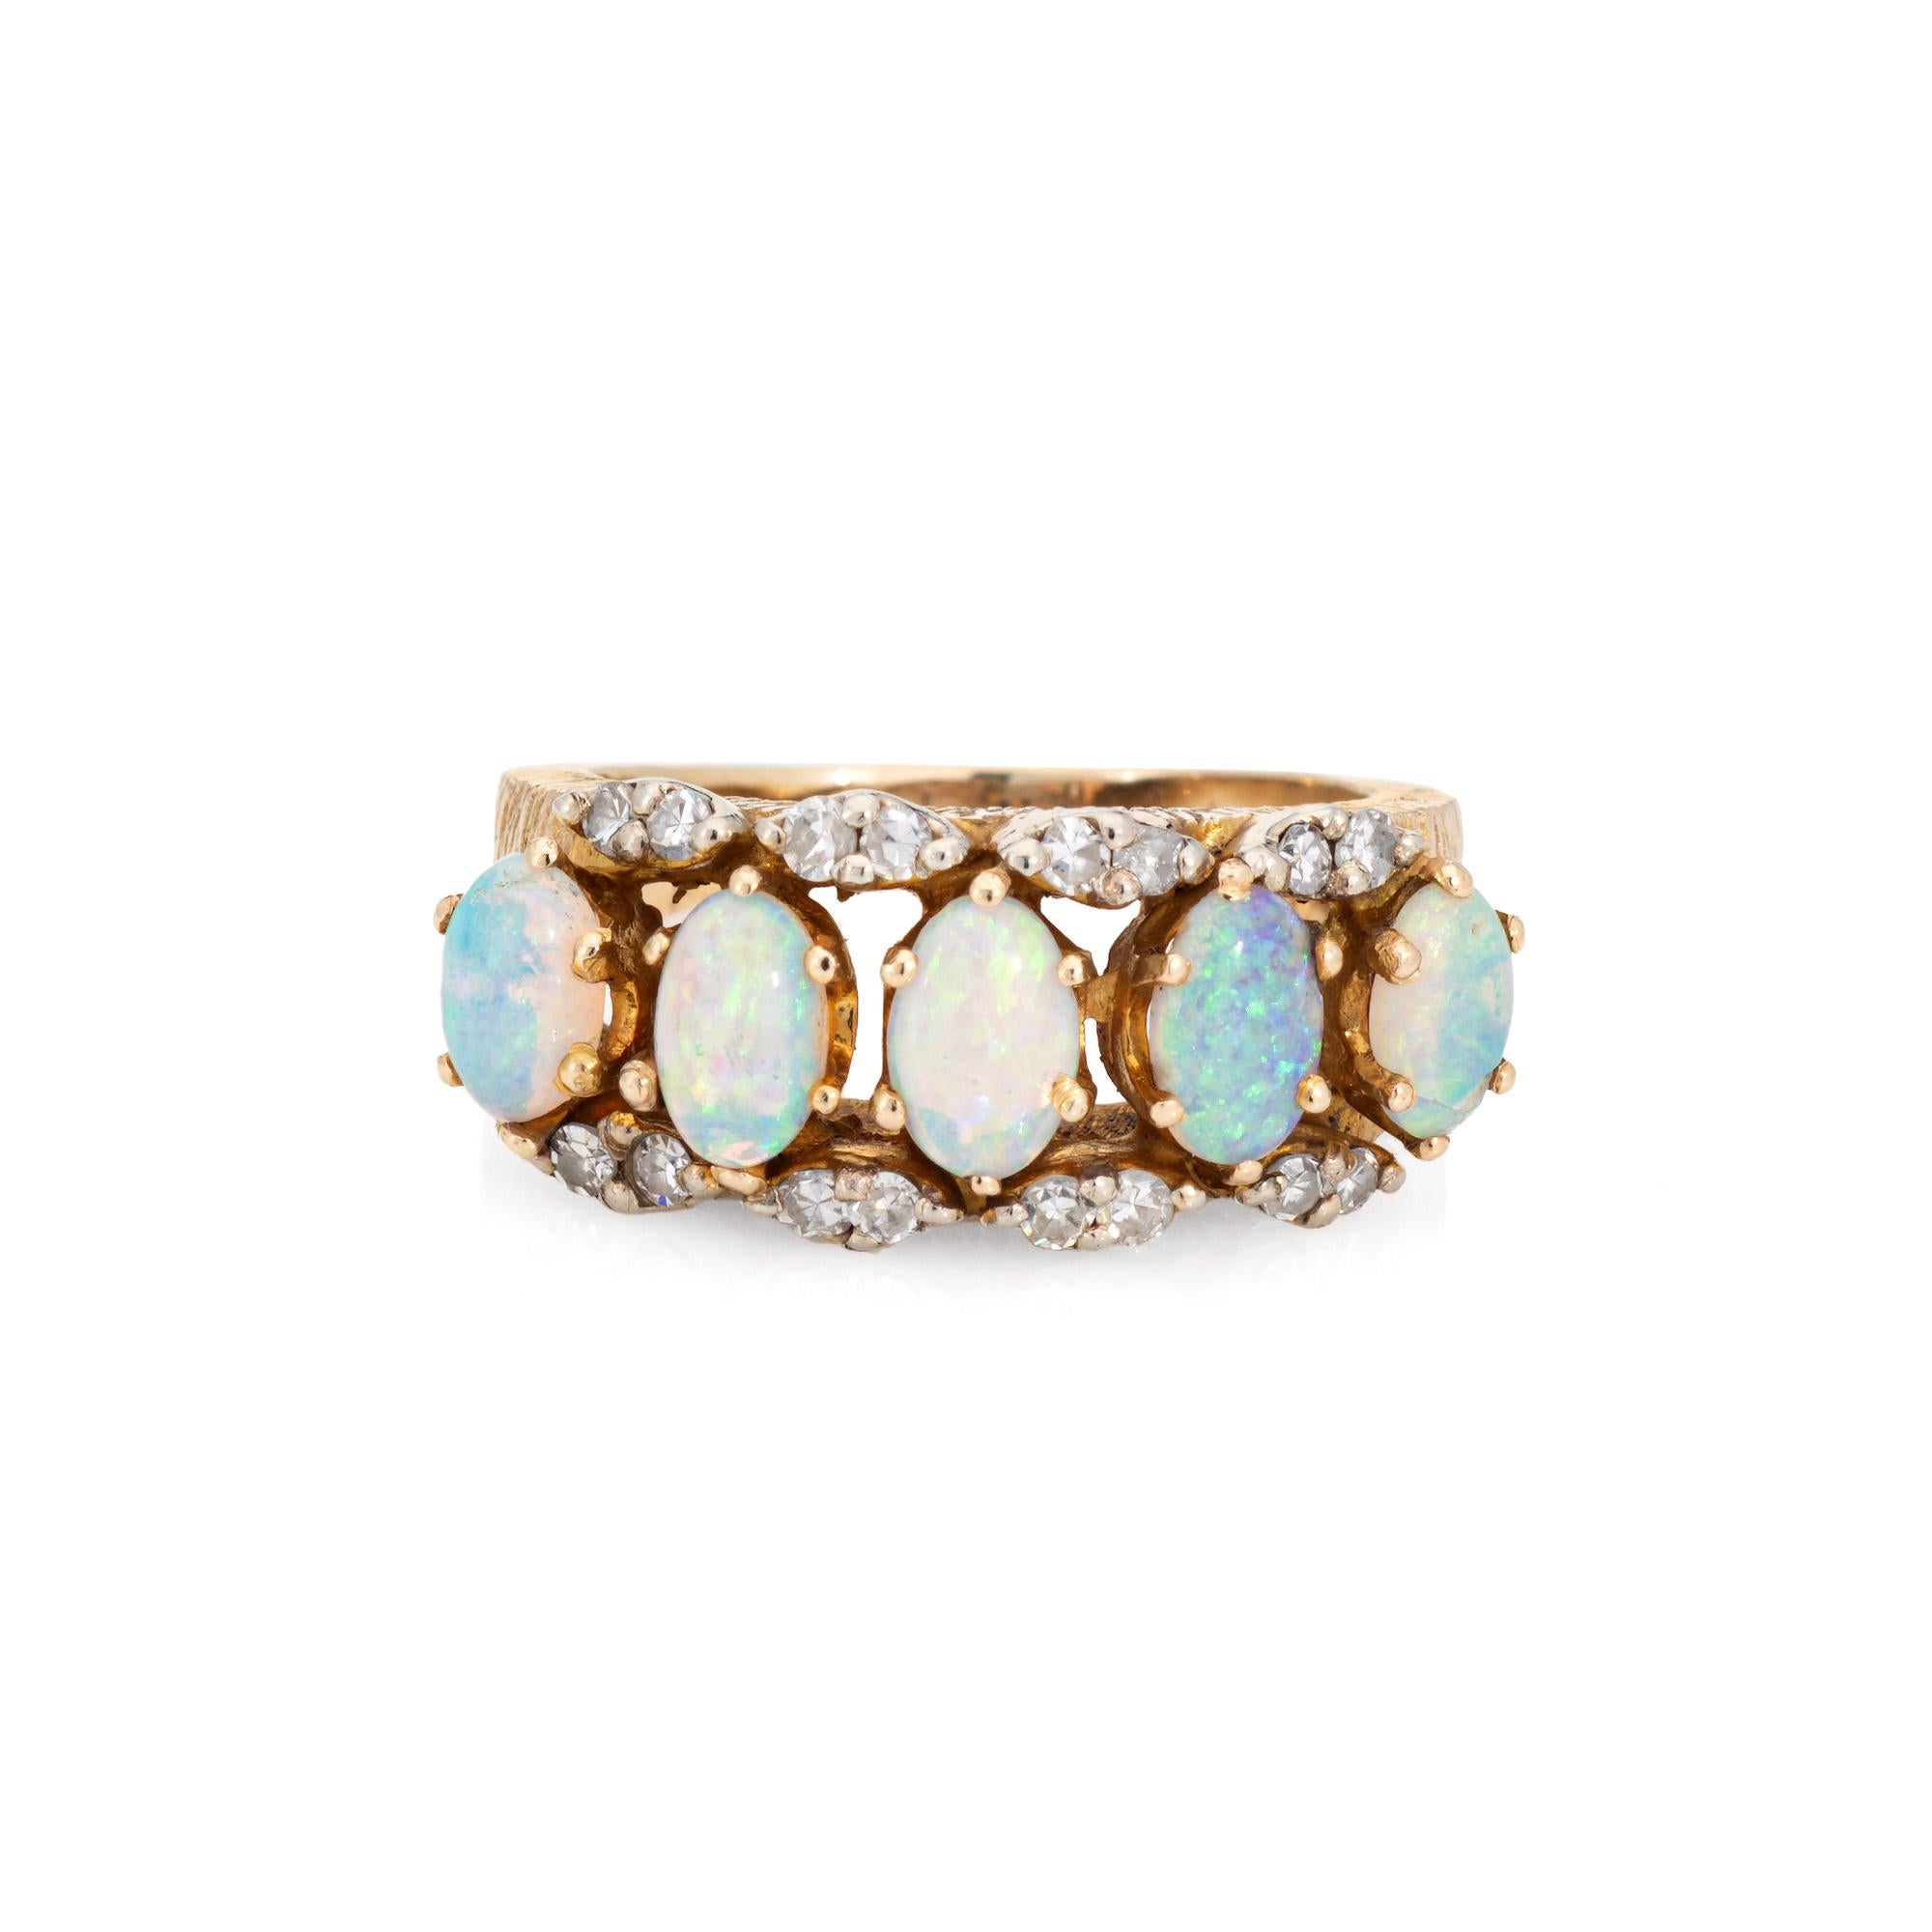 Stylish and finely detailed opal & diamond ring crafted in 14 karat yellow gold (circa 1960s).

Cabochon cut opals measure 5mm x 3mm. 16 single cut diamonds total an estimated 0.08 carats (estimated at H-I color and VS2-I1 clarity). Note: few chips